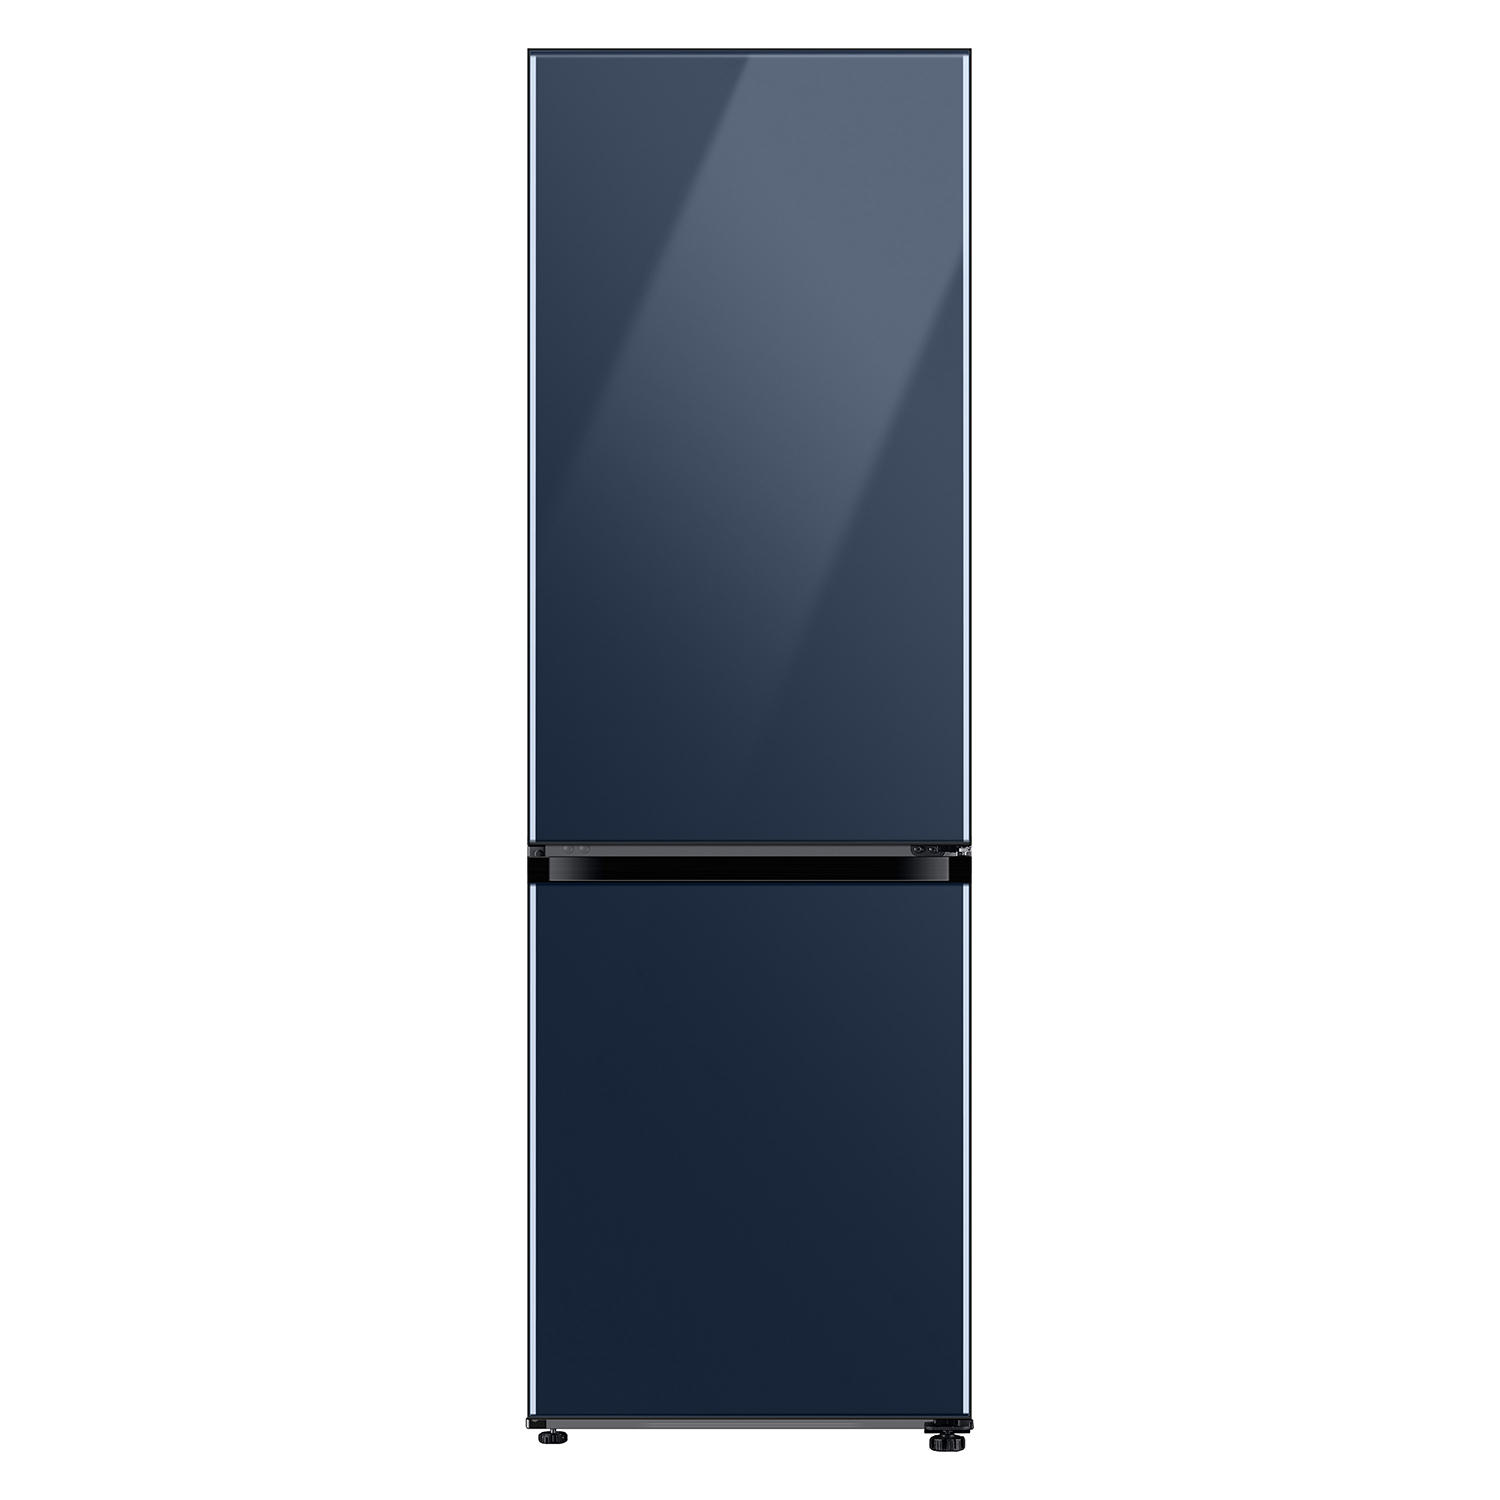 SAMSUNG 12.0 cu. ft. BESPOKE Bottom Freezer Refrigerator with Customizable Colors and Flexible Design, Navy Glass